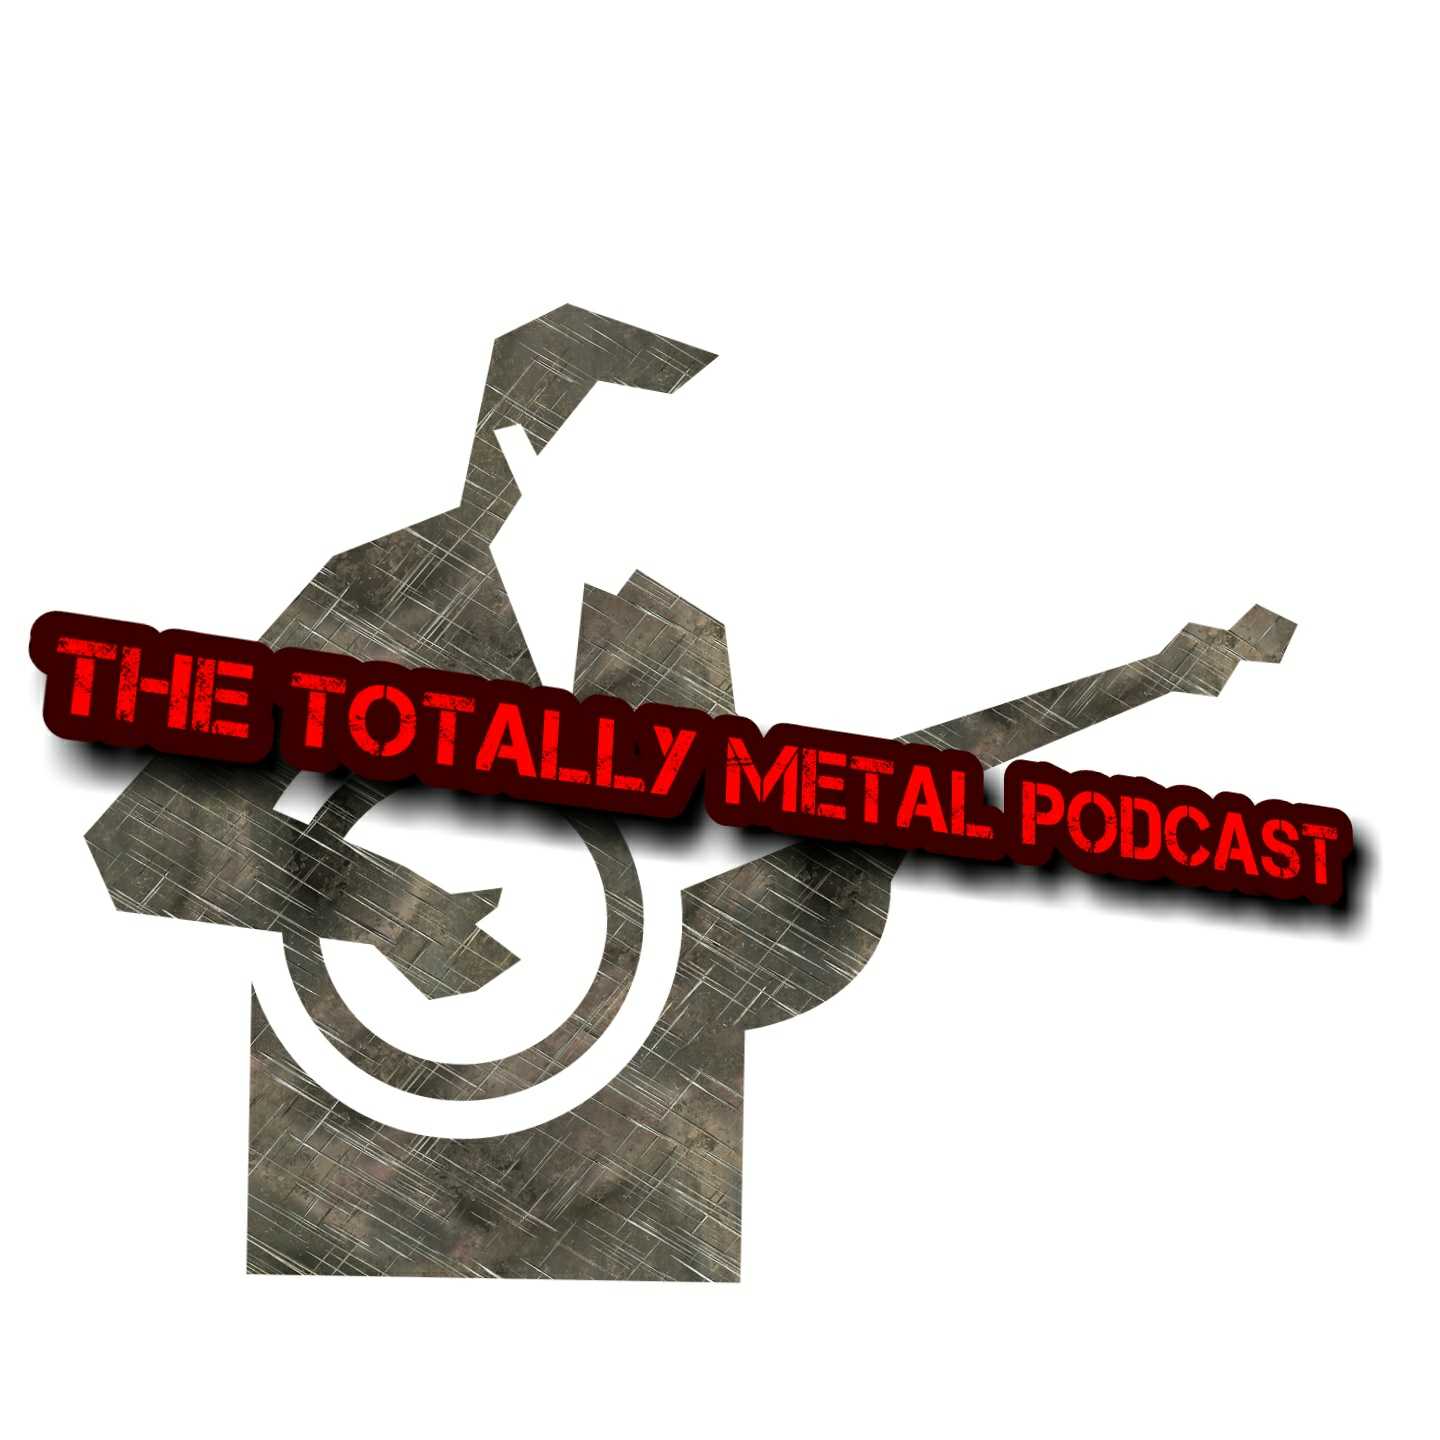 The Totally Metal Podcast